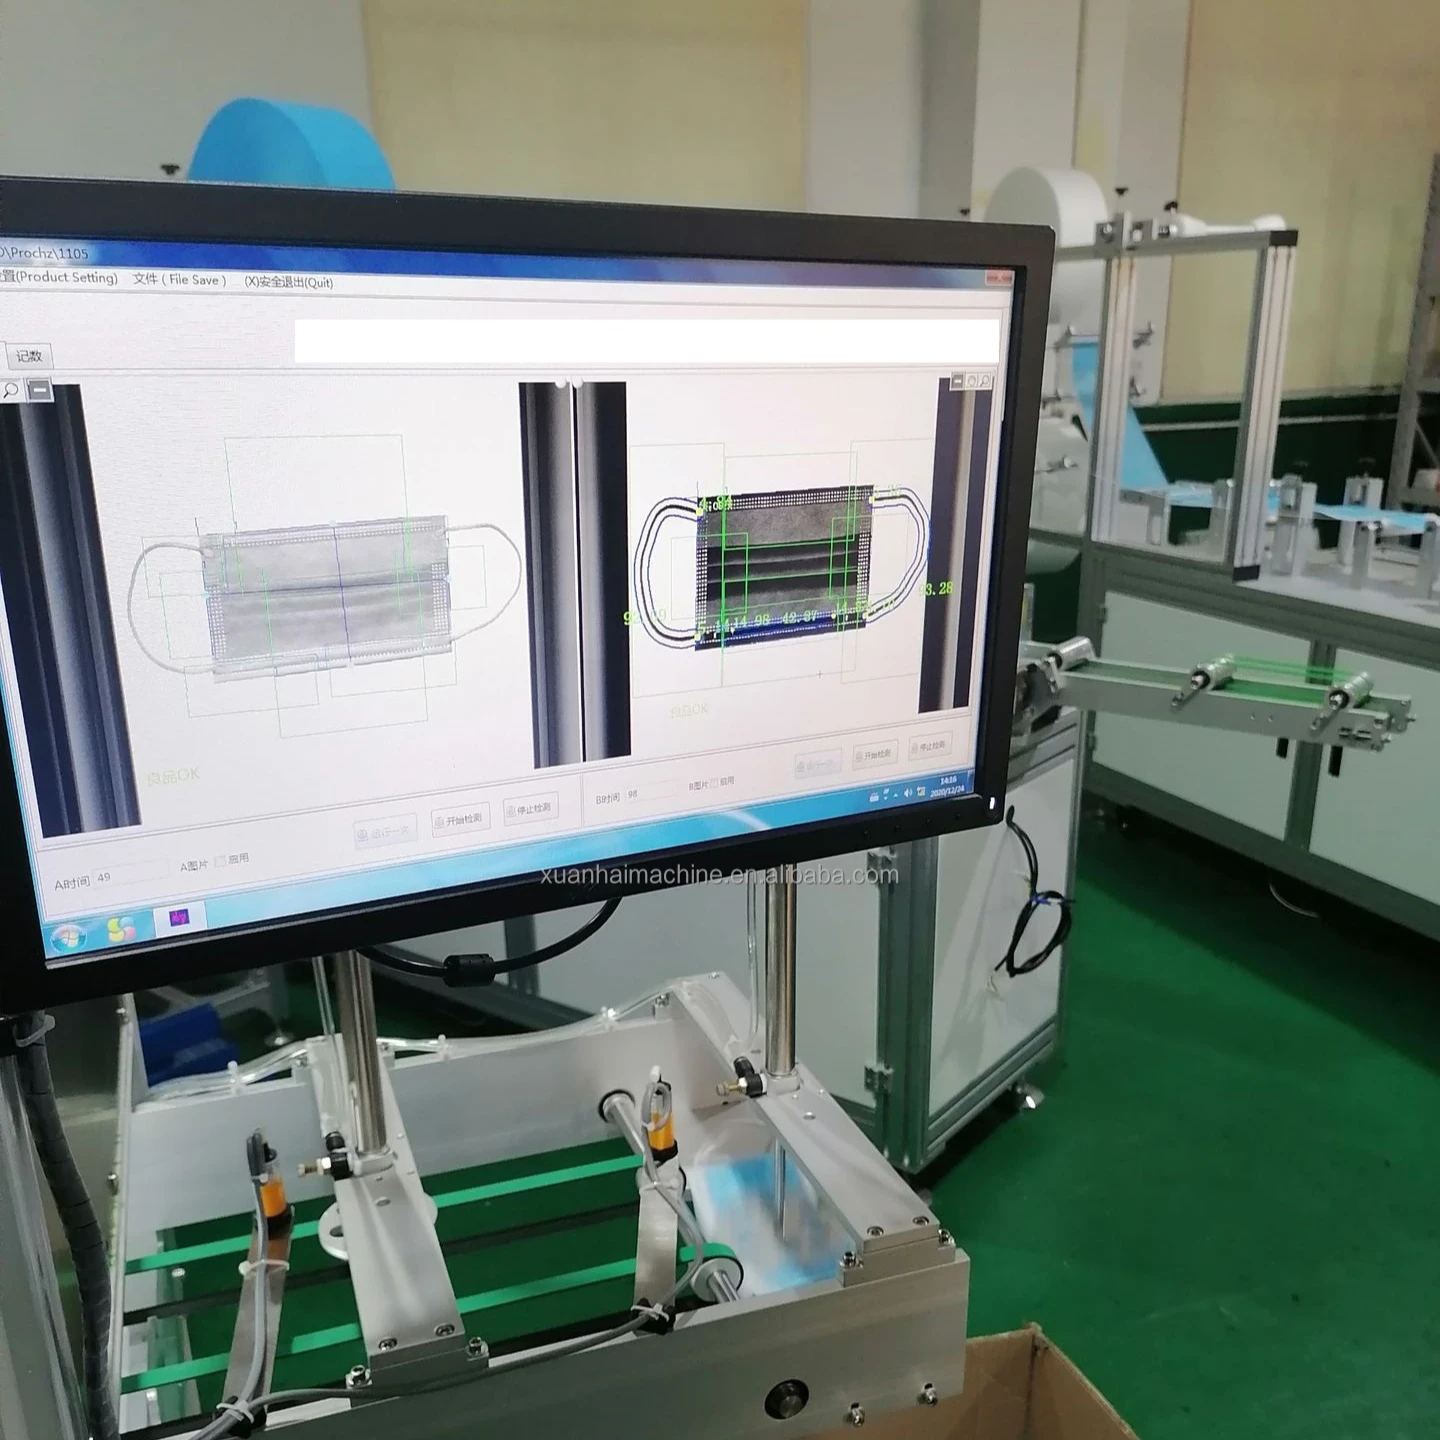 

Disposable automatic inspection system visual online inspection system Medical appearance inspection equipment